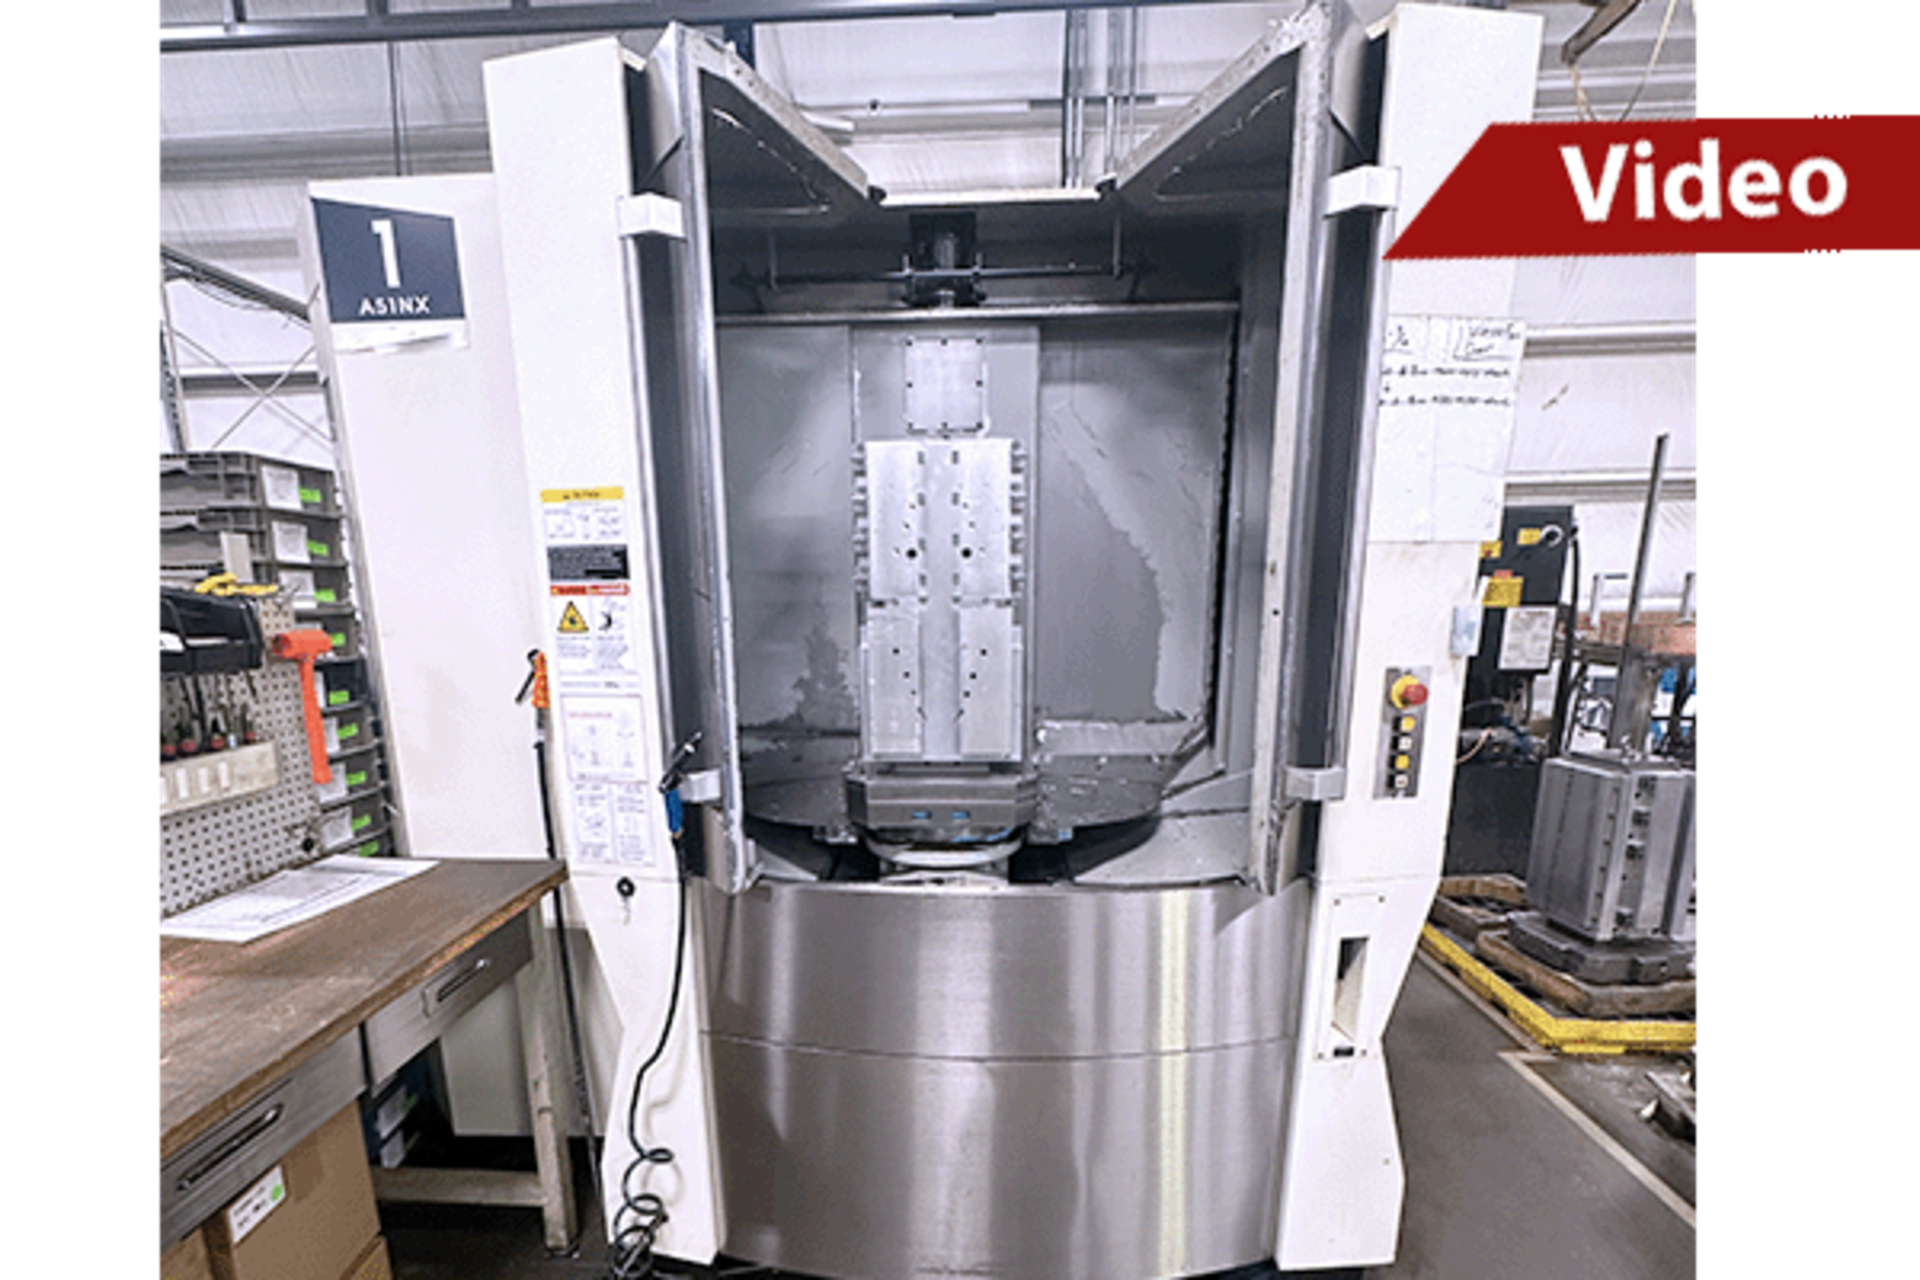 Makino A51NX (2012) - NEW Spindle in 2021